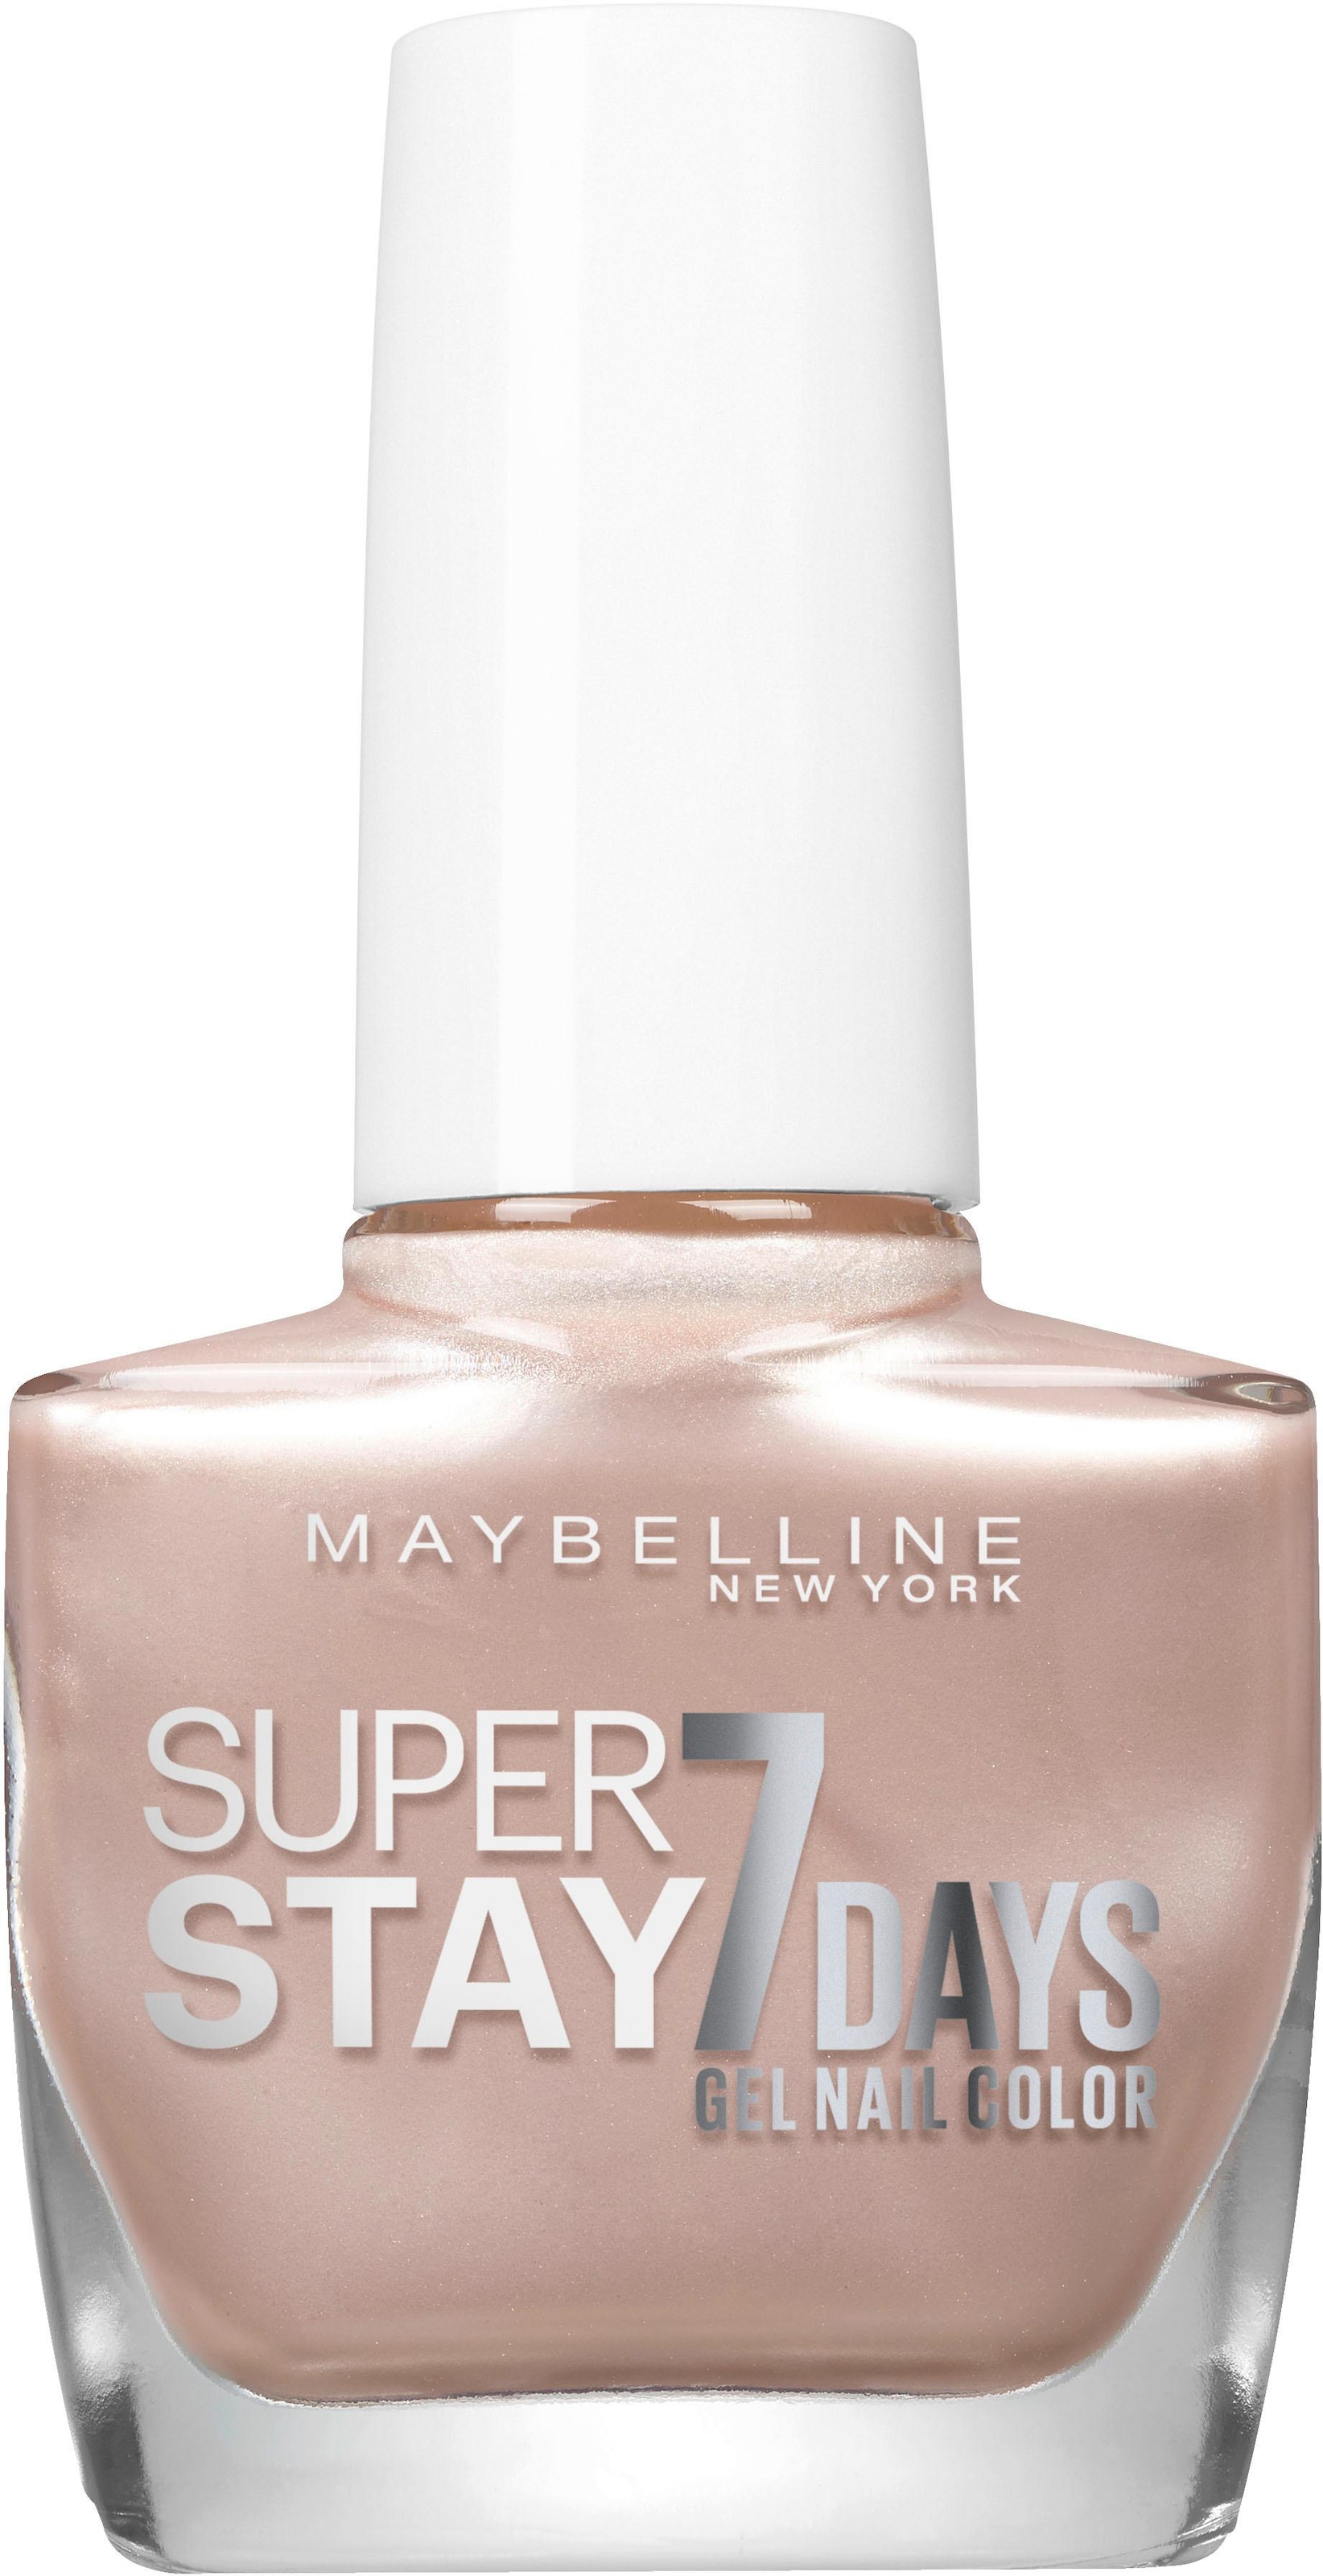 MAYBELLINE NEW YORK 7 City Tage bei ♕ Nudes« Nagellack »Superstay